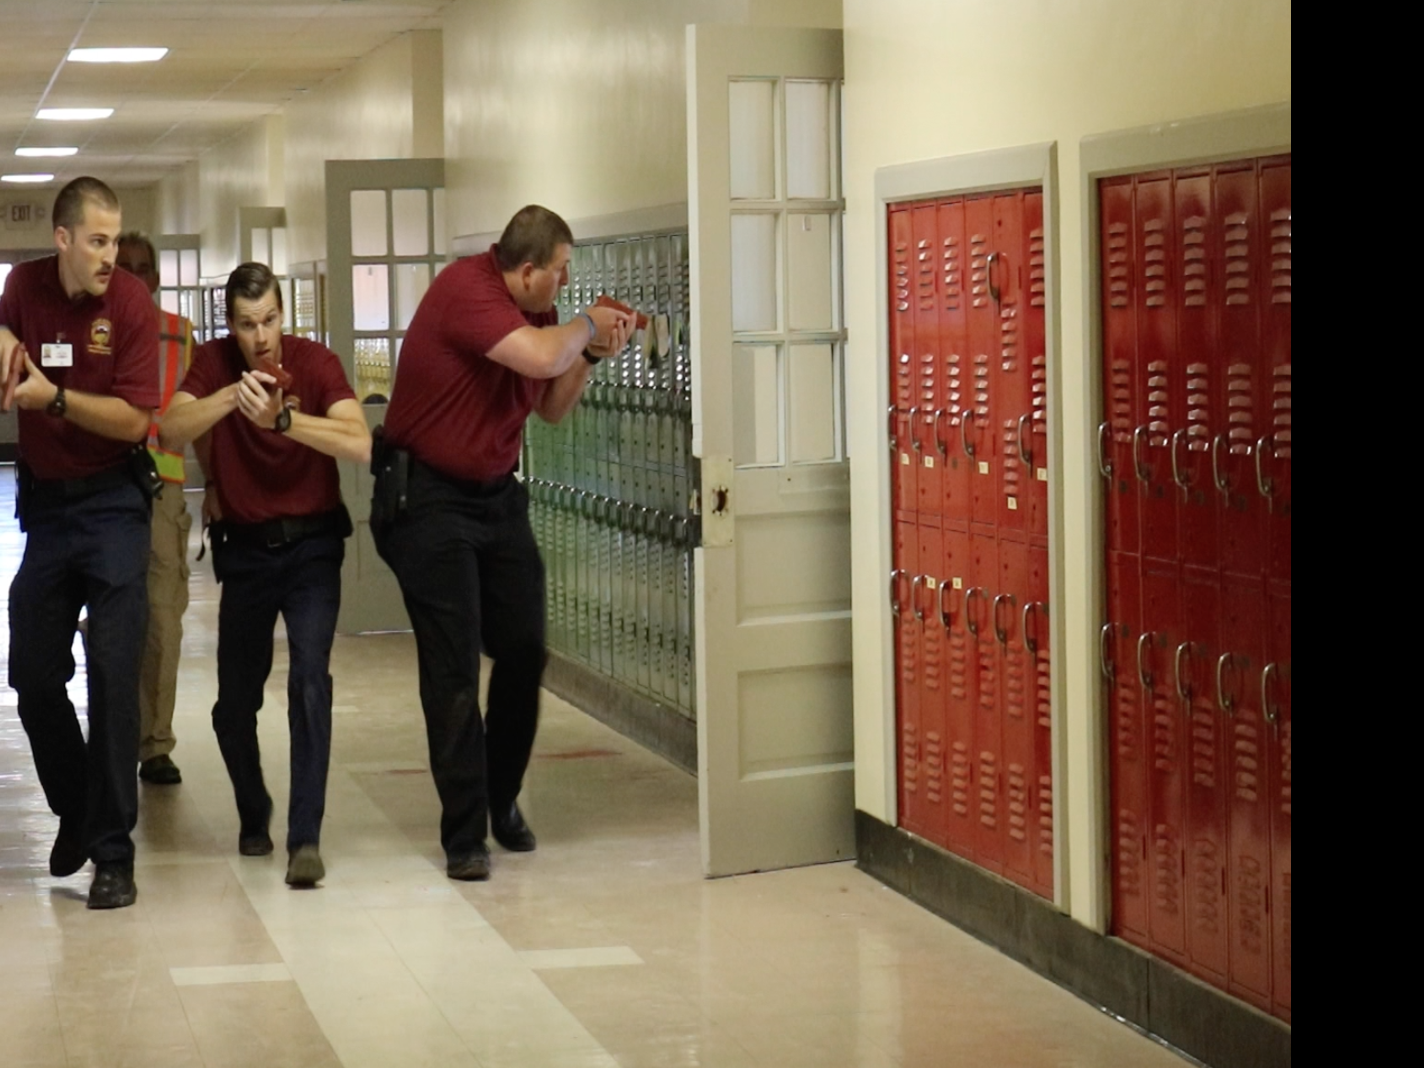 Law enforcement students participate in active shooter training